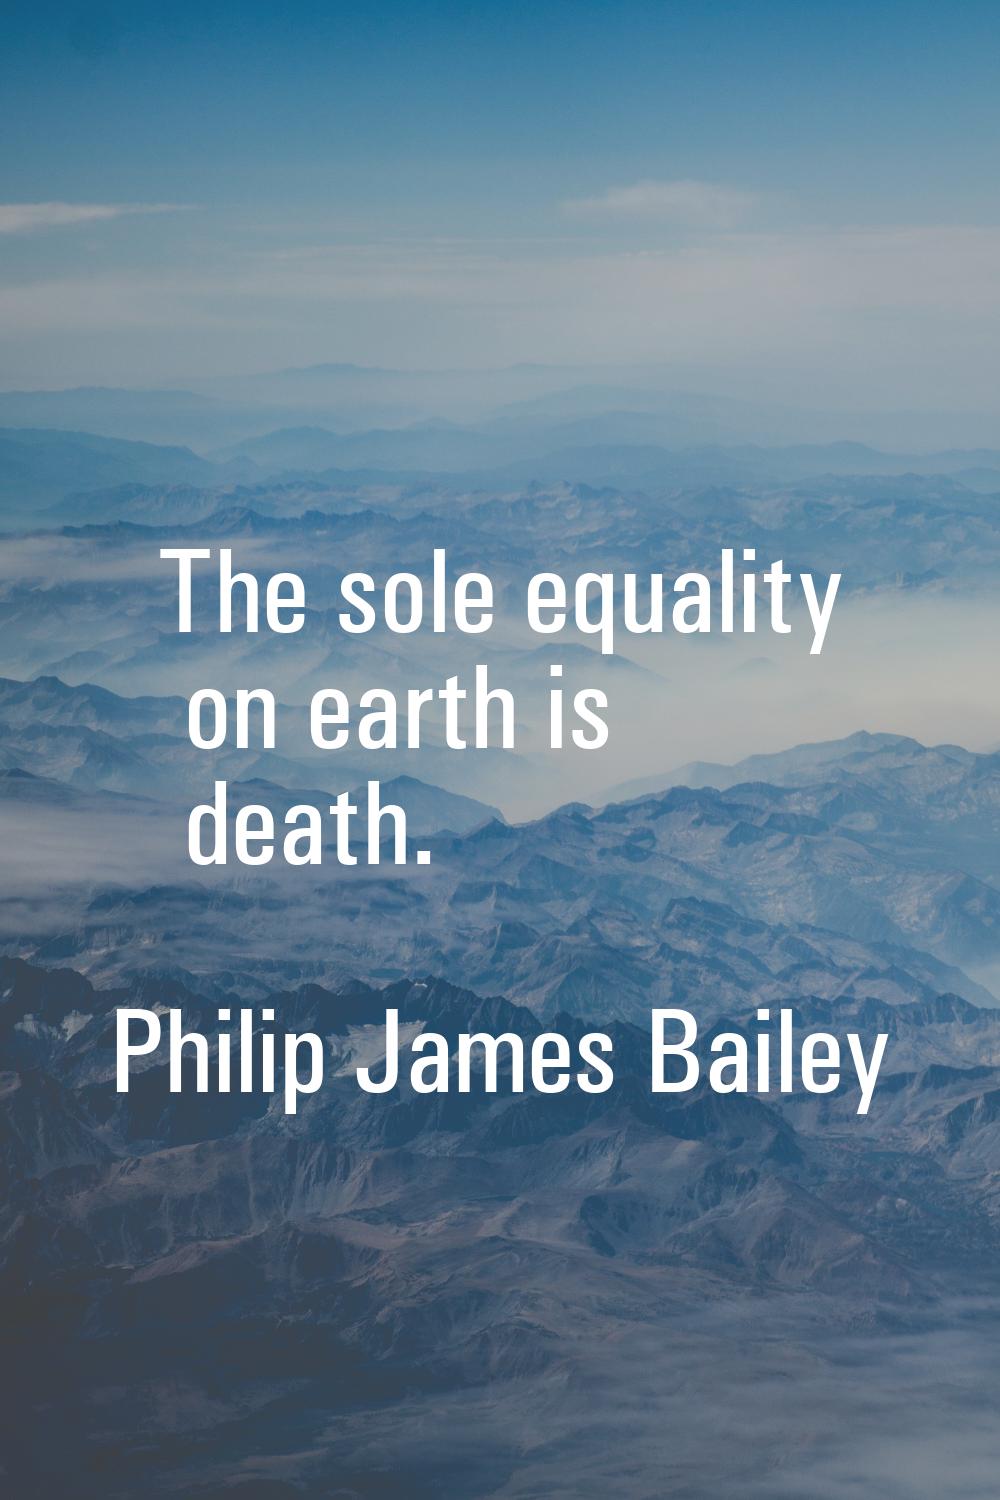 The sole equality on earth is death.